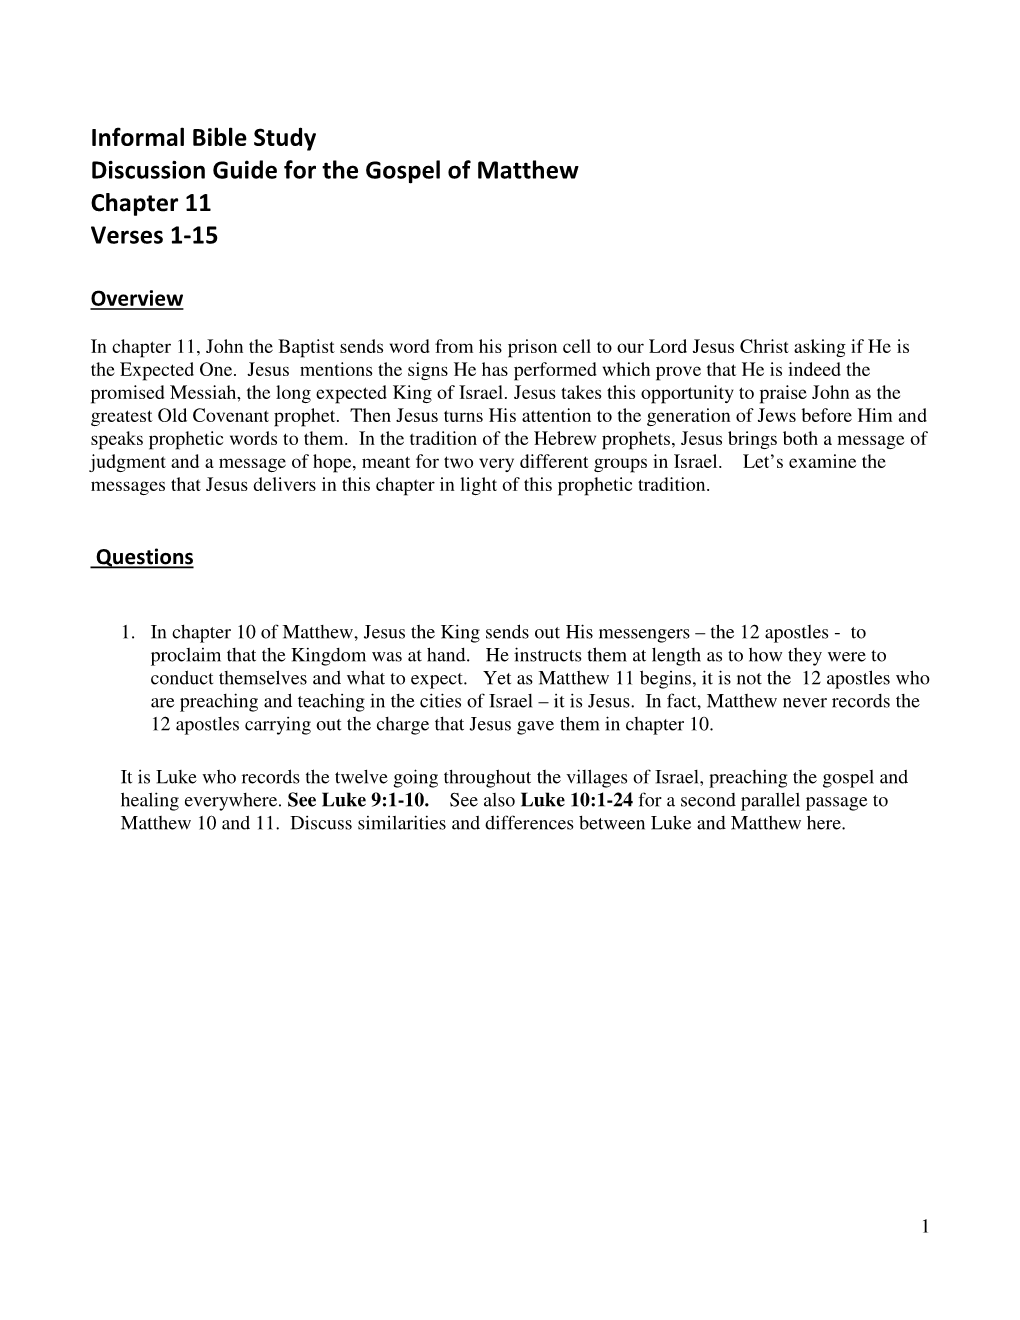 Informal Bible Study Discussion Guide for the Gospel of Matthew Chapter 11 Verses 1-15